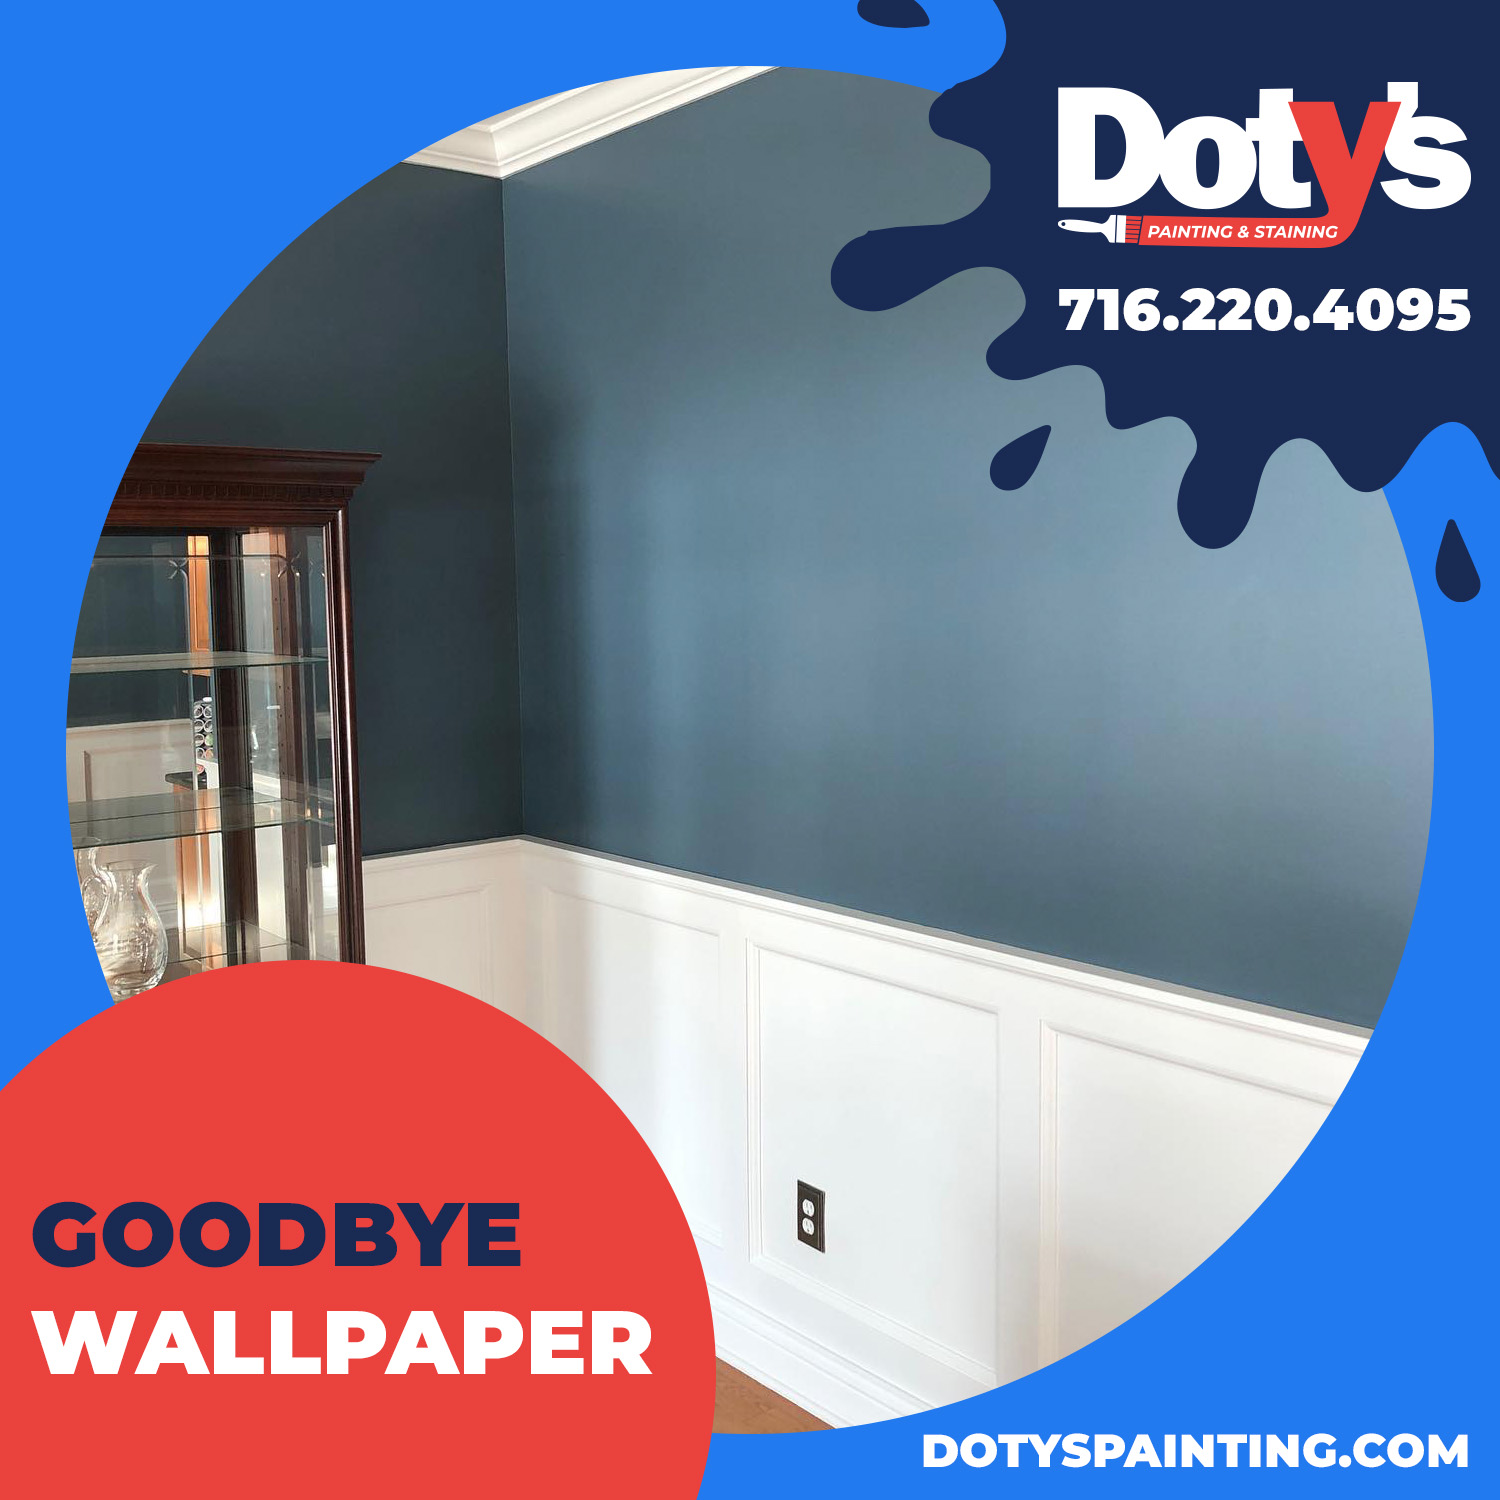 Read more about the article Goodbye Wallpaper, Hello Wainscoting